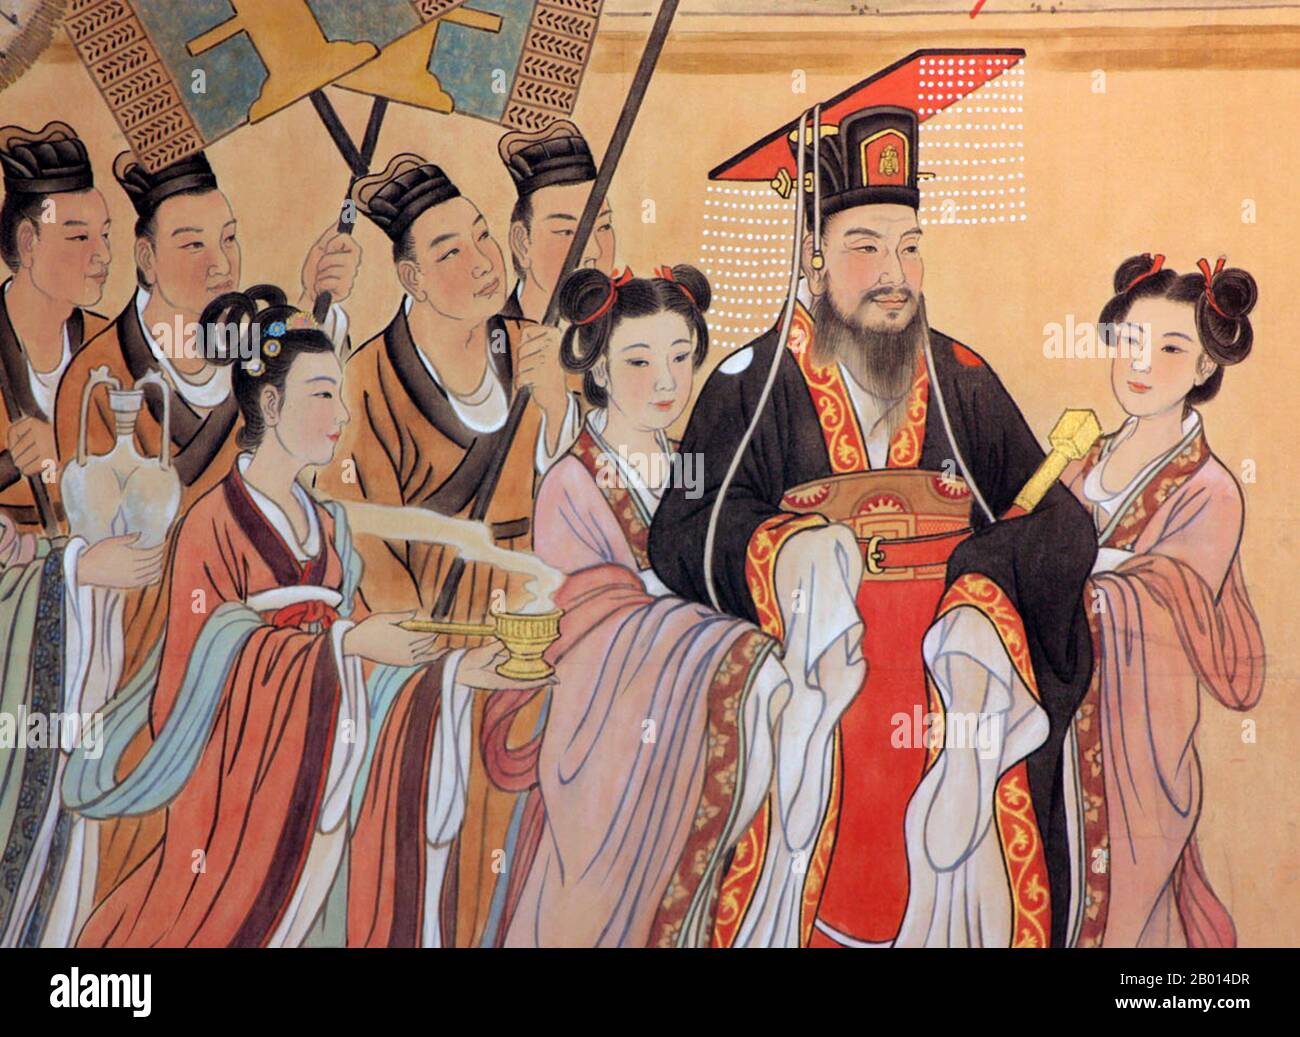 China: Mural of Emperor Wen (541–604), founder of the Sui Dynasty (r.581-604).   Emperor Wen of Sui, personal name Yang Jian, was the founder and first emperor of China's Sui Dynasty (581-618). He was a hard-working administrator. As a Buddhist, he encouraged the spread of Buddhism through the state. Emperor Wen's reign introduced a  period of great prosperity not seen since the Han Dynasty. Economically, the dynasty prospered. It was said that there was enough food stored for 50 years. The military was also powerful. Stock Photo